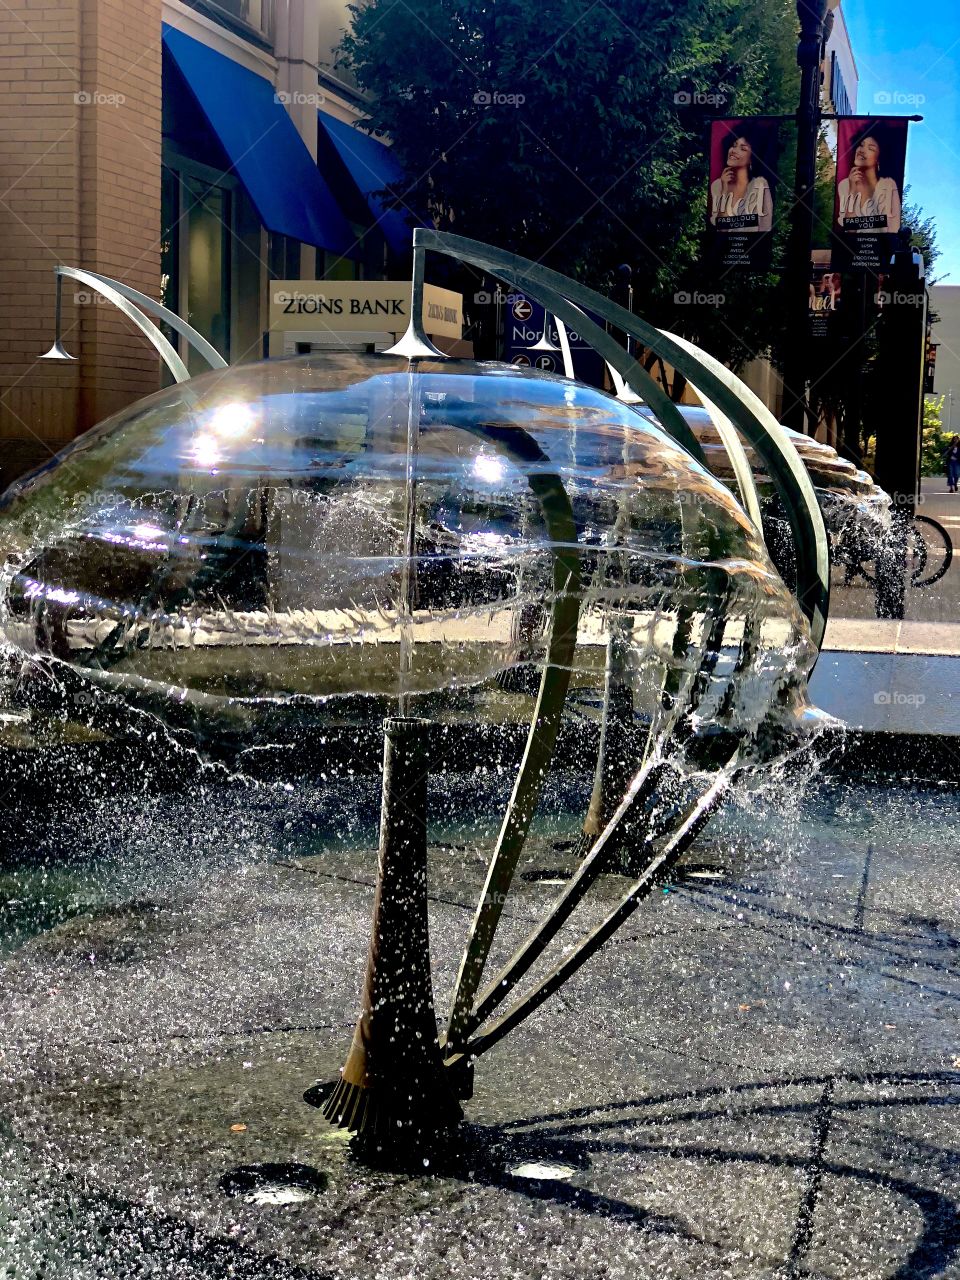 A fun-souled umbrella fountain right in the heart of downtown Salt Lake City making me wish I could jump in on this hot summer day